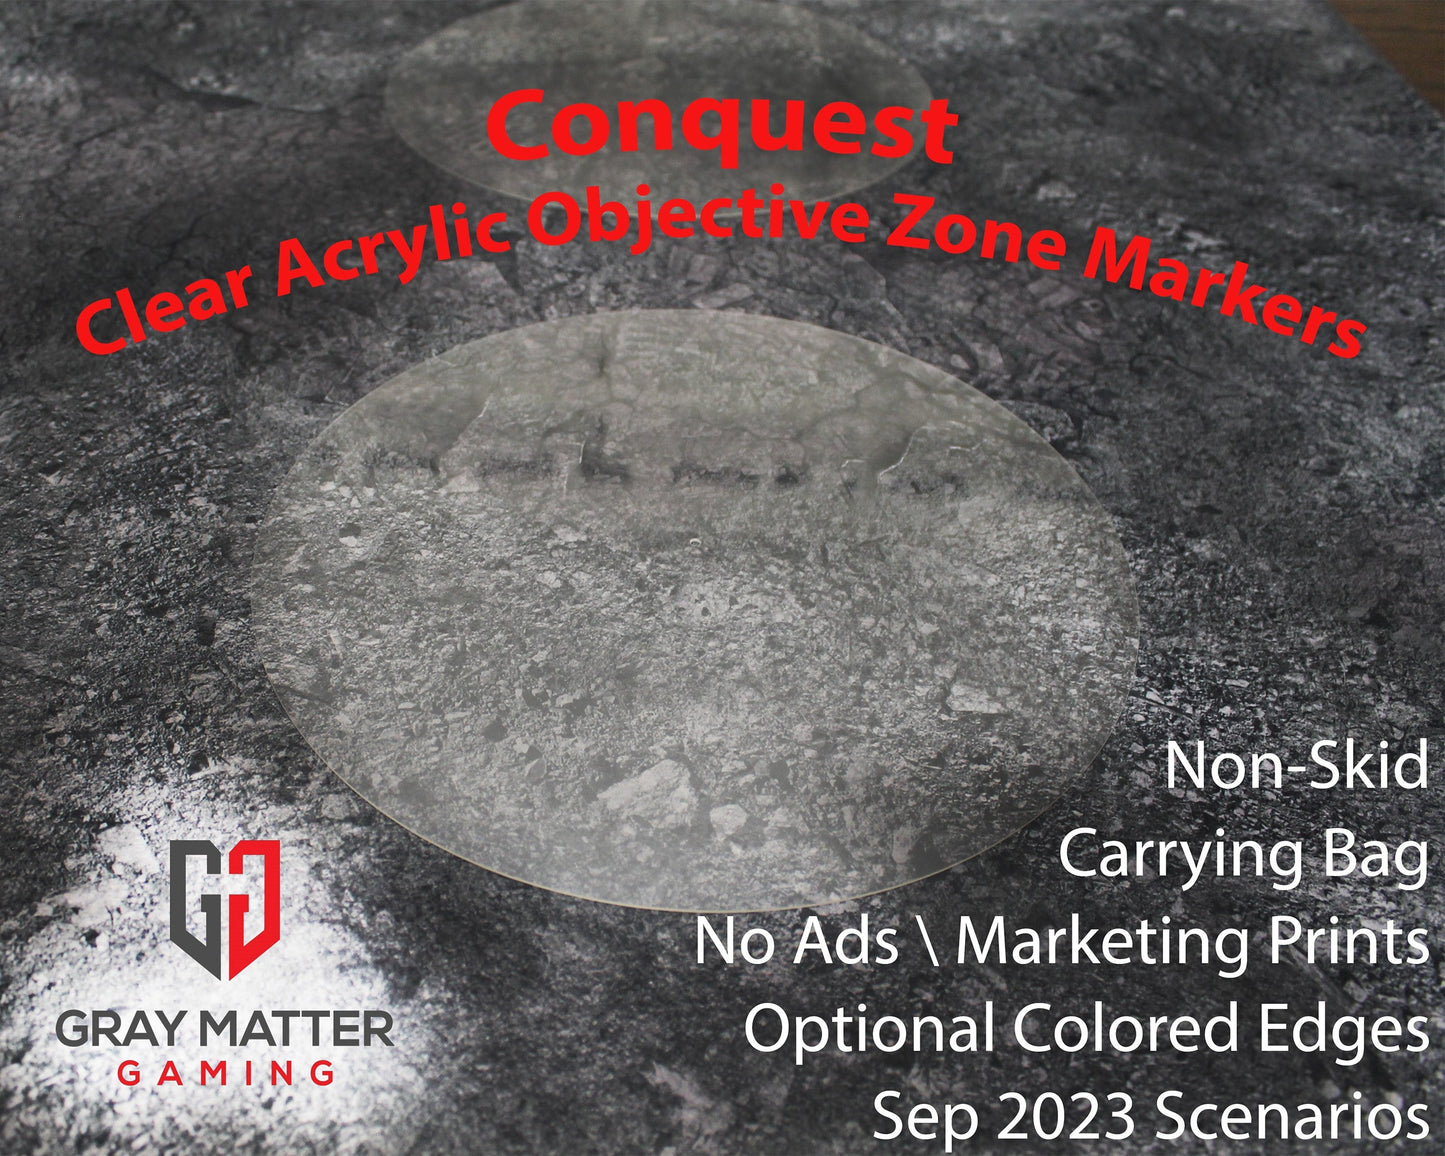 Conquest Object Zone - Single 9" Add-on - Acrylic